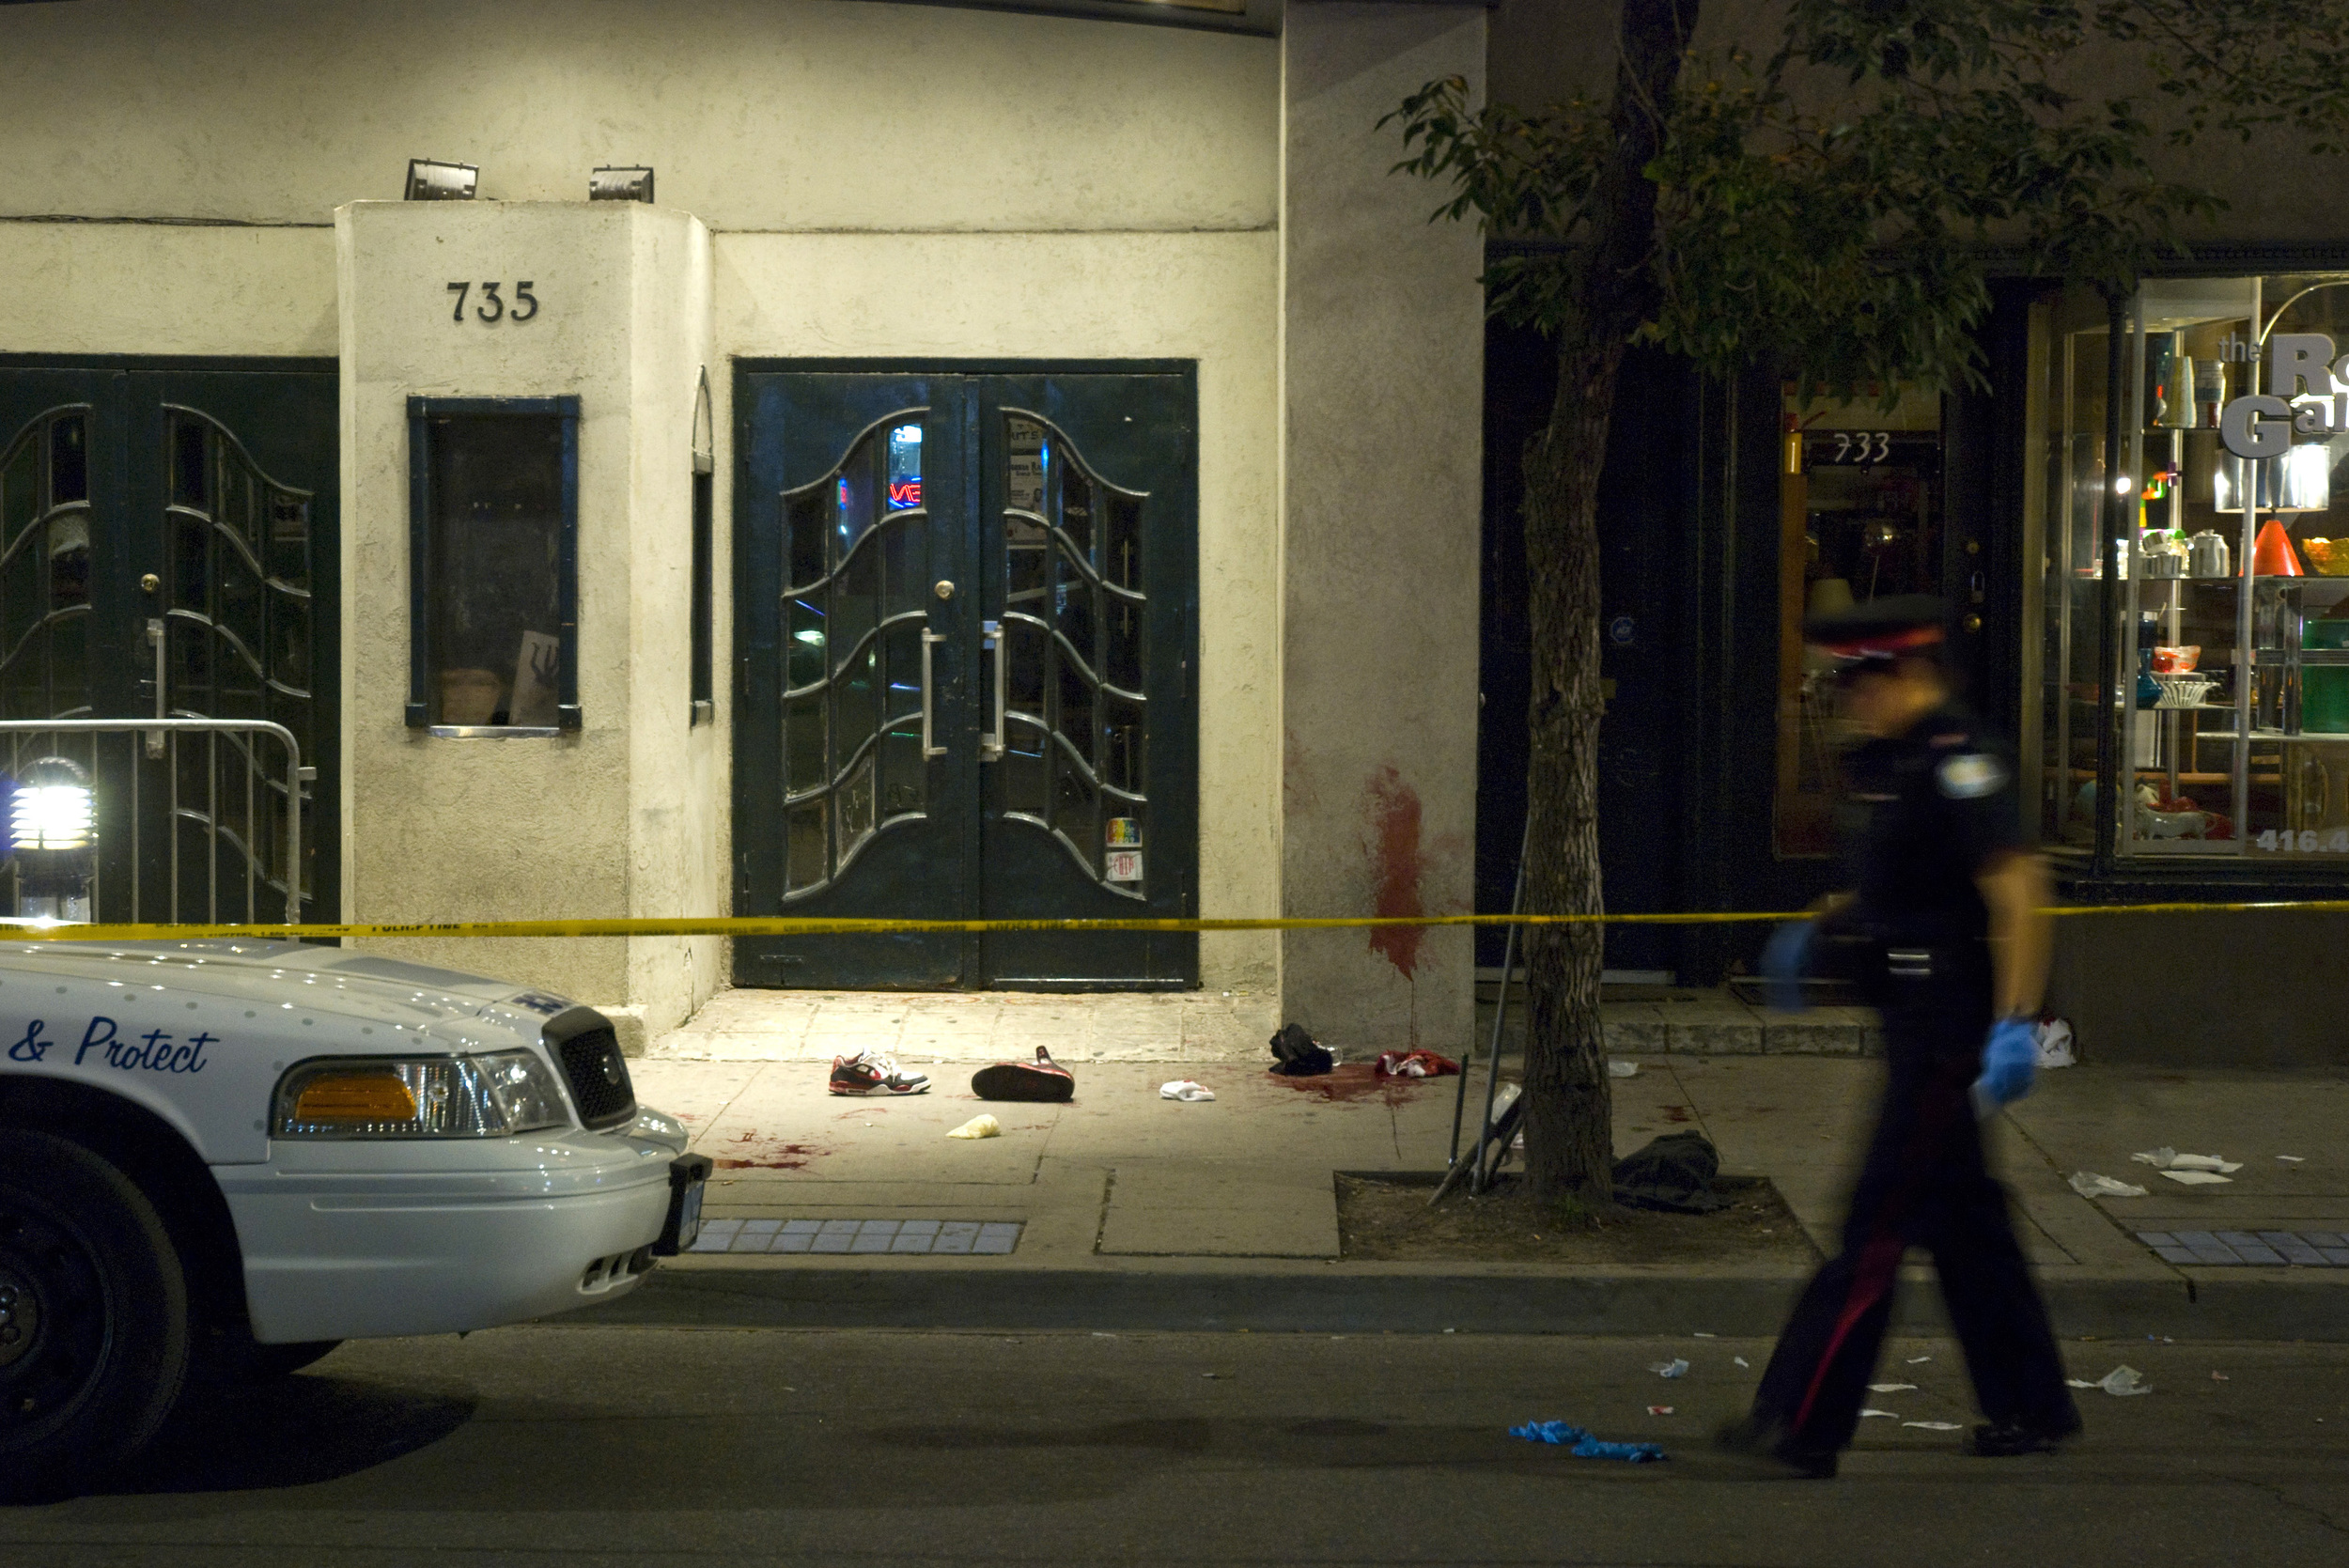  A Toronto Police Service officer walks past the scene of a stabbing which occurred outside the Opera House concert hall at Broadview and Queen West on August 6, 2009.&nbsp; Two men were taken to the hospital with serious injuries. 